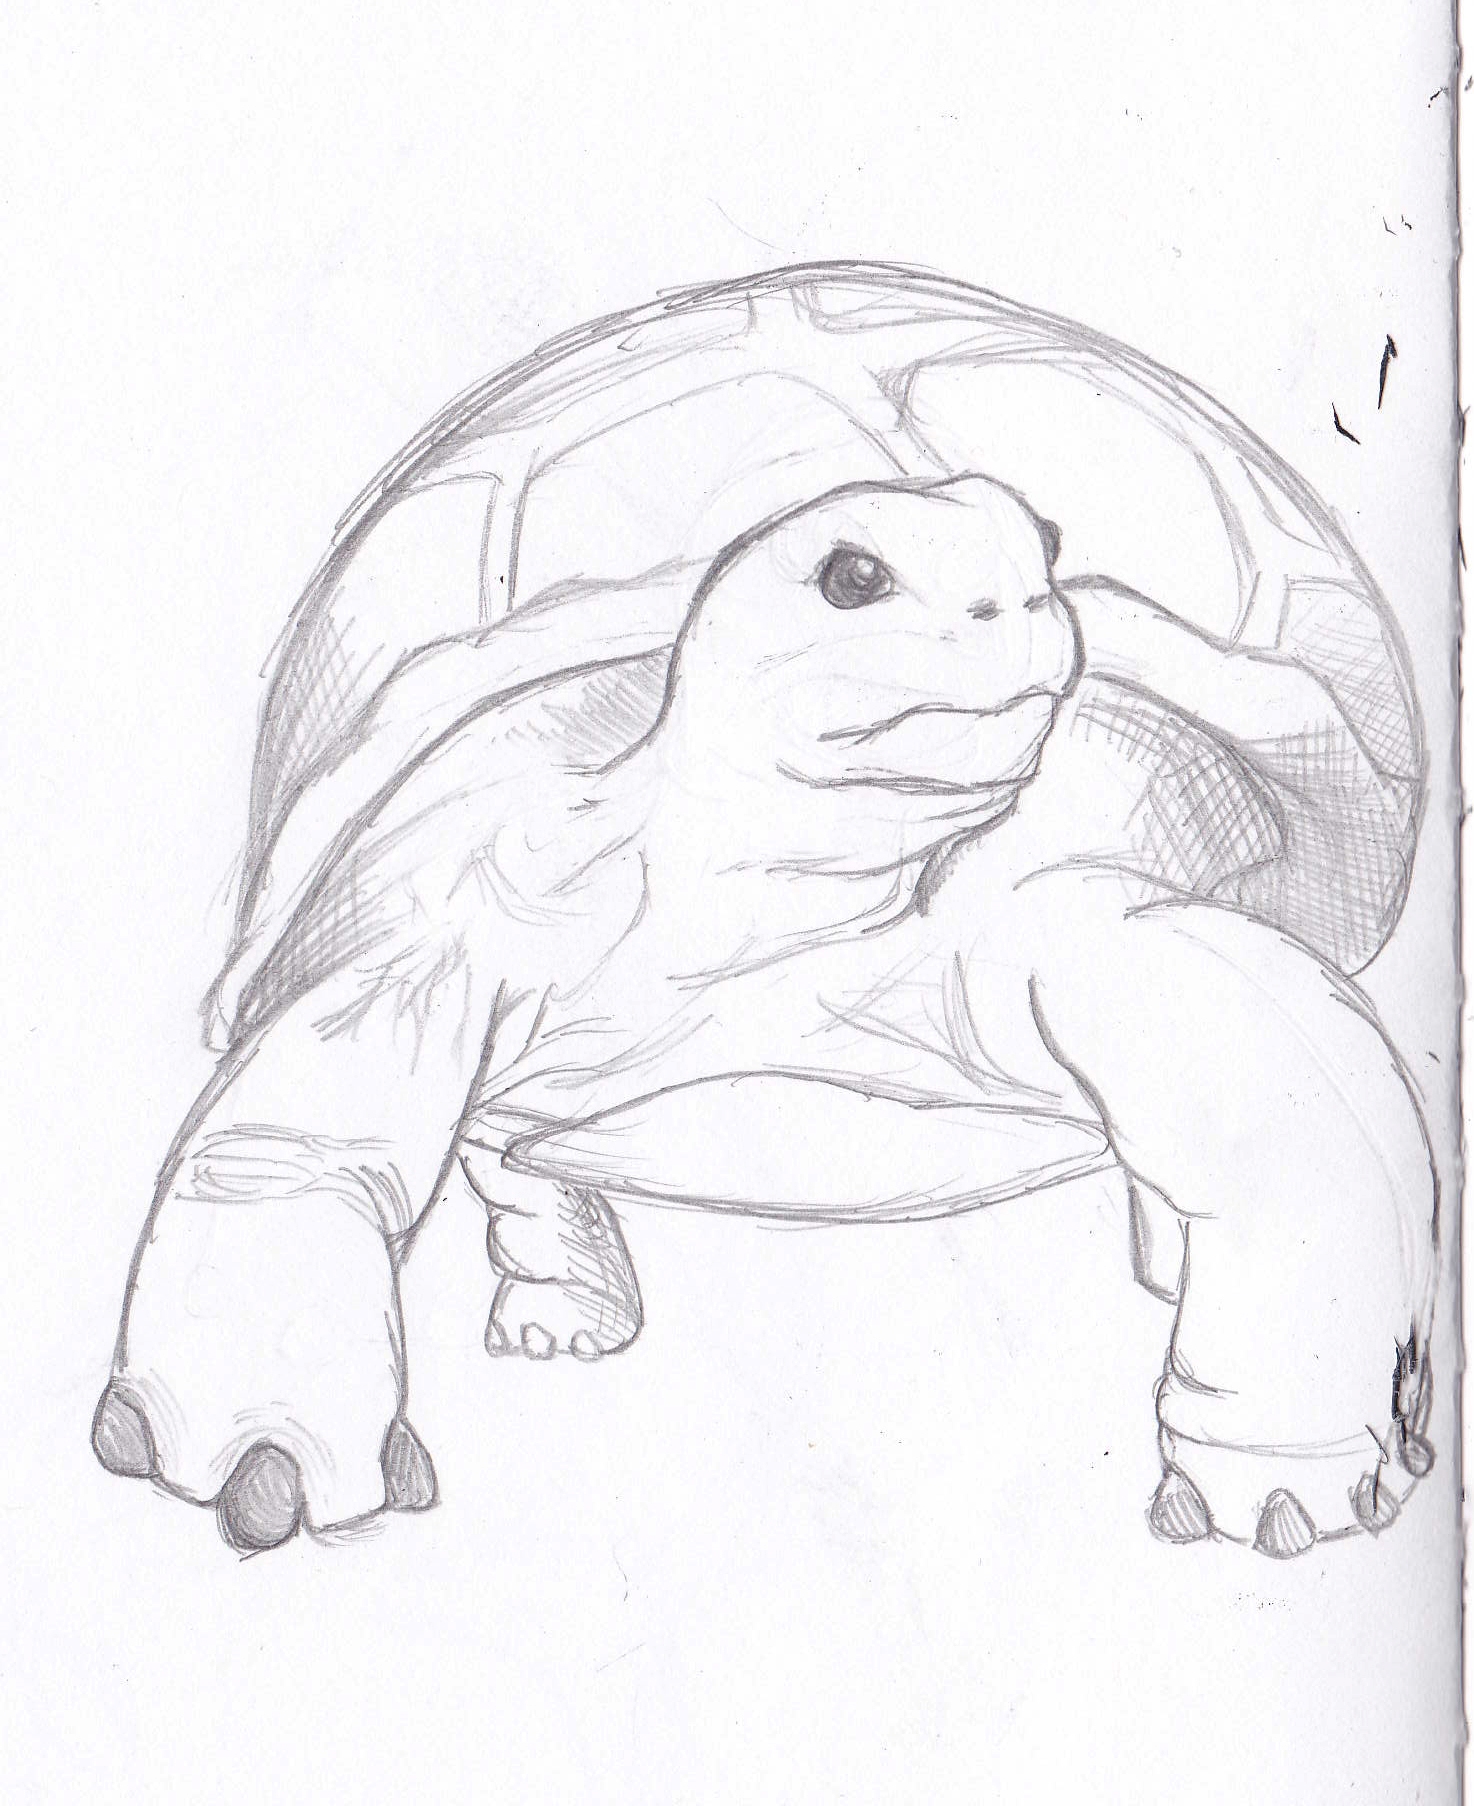 Turtle Sketch Images at PaintingValley.com | Explore collection of ...